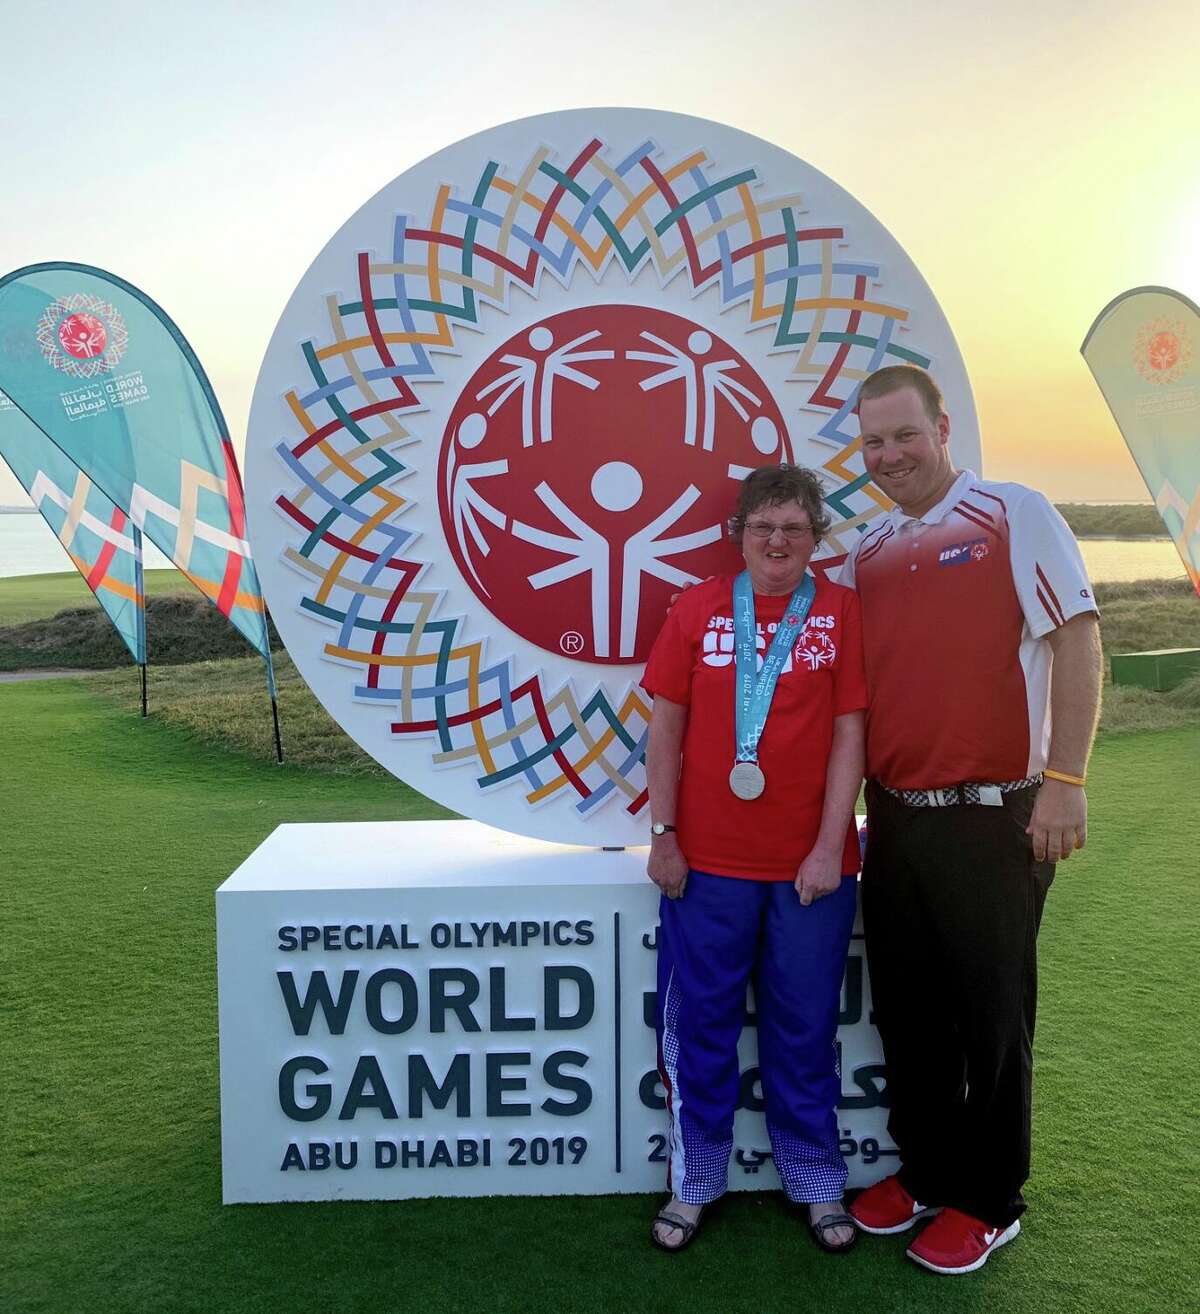 Smith attended the 2019 World Games in Abu Dhabi.